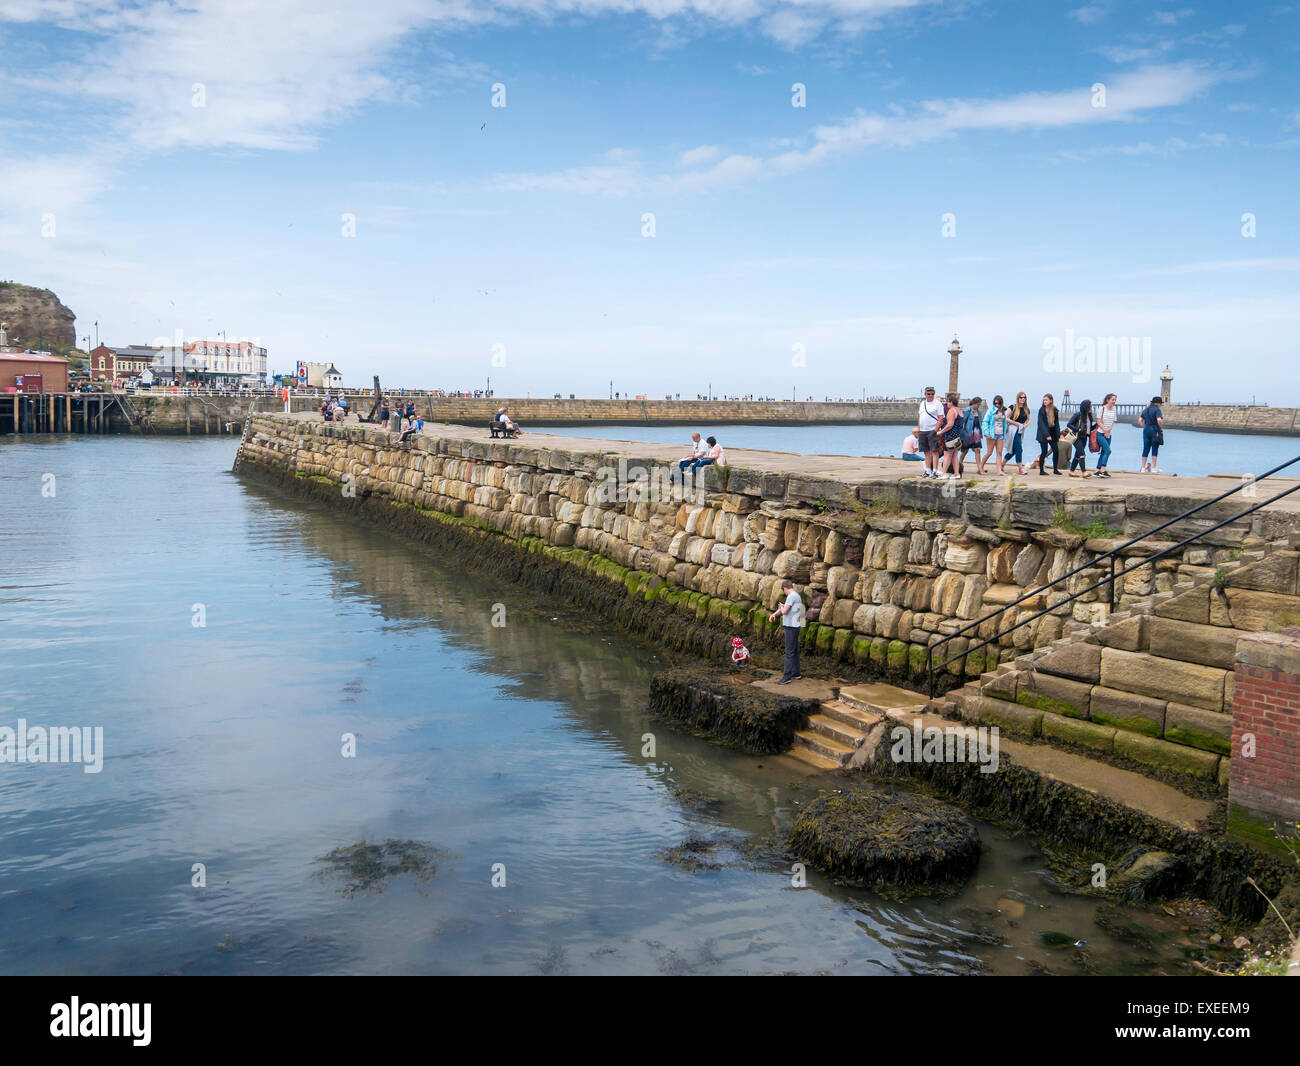 Holiday makers on Tate Hill Pier Whitby North Yorkshire, the pier buiLt in A.D.1190 is one of the oldest in the world Stock Photo